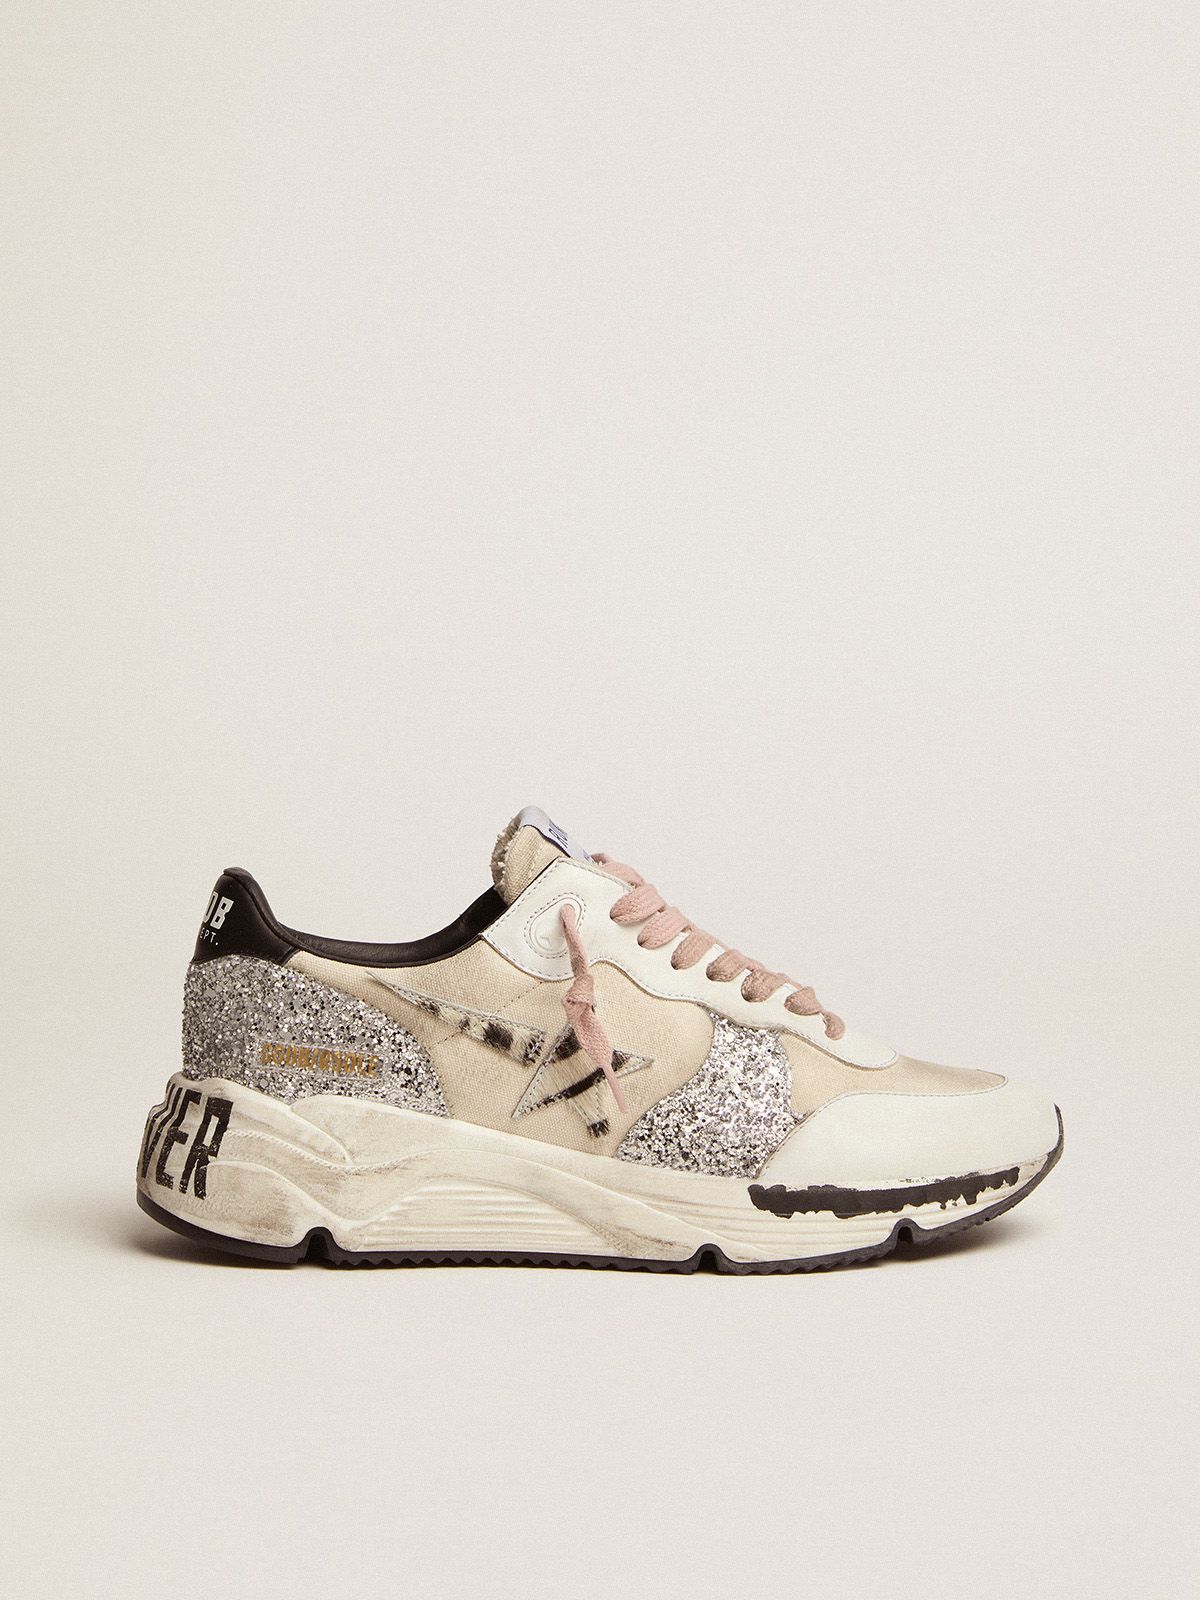 Running Sole sneakers with cream canvas upper and zebra-print pony skin star